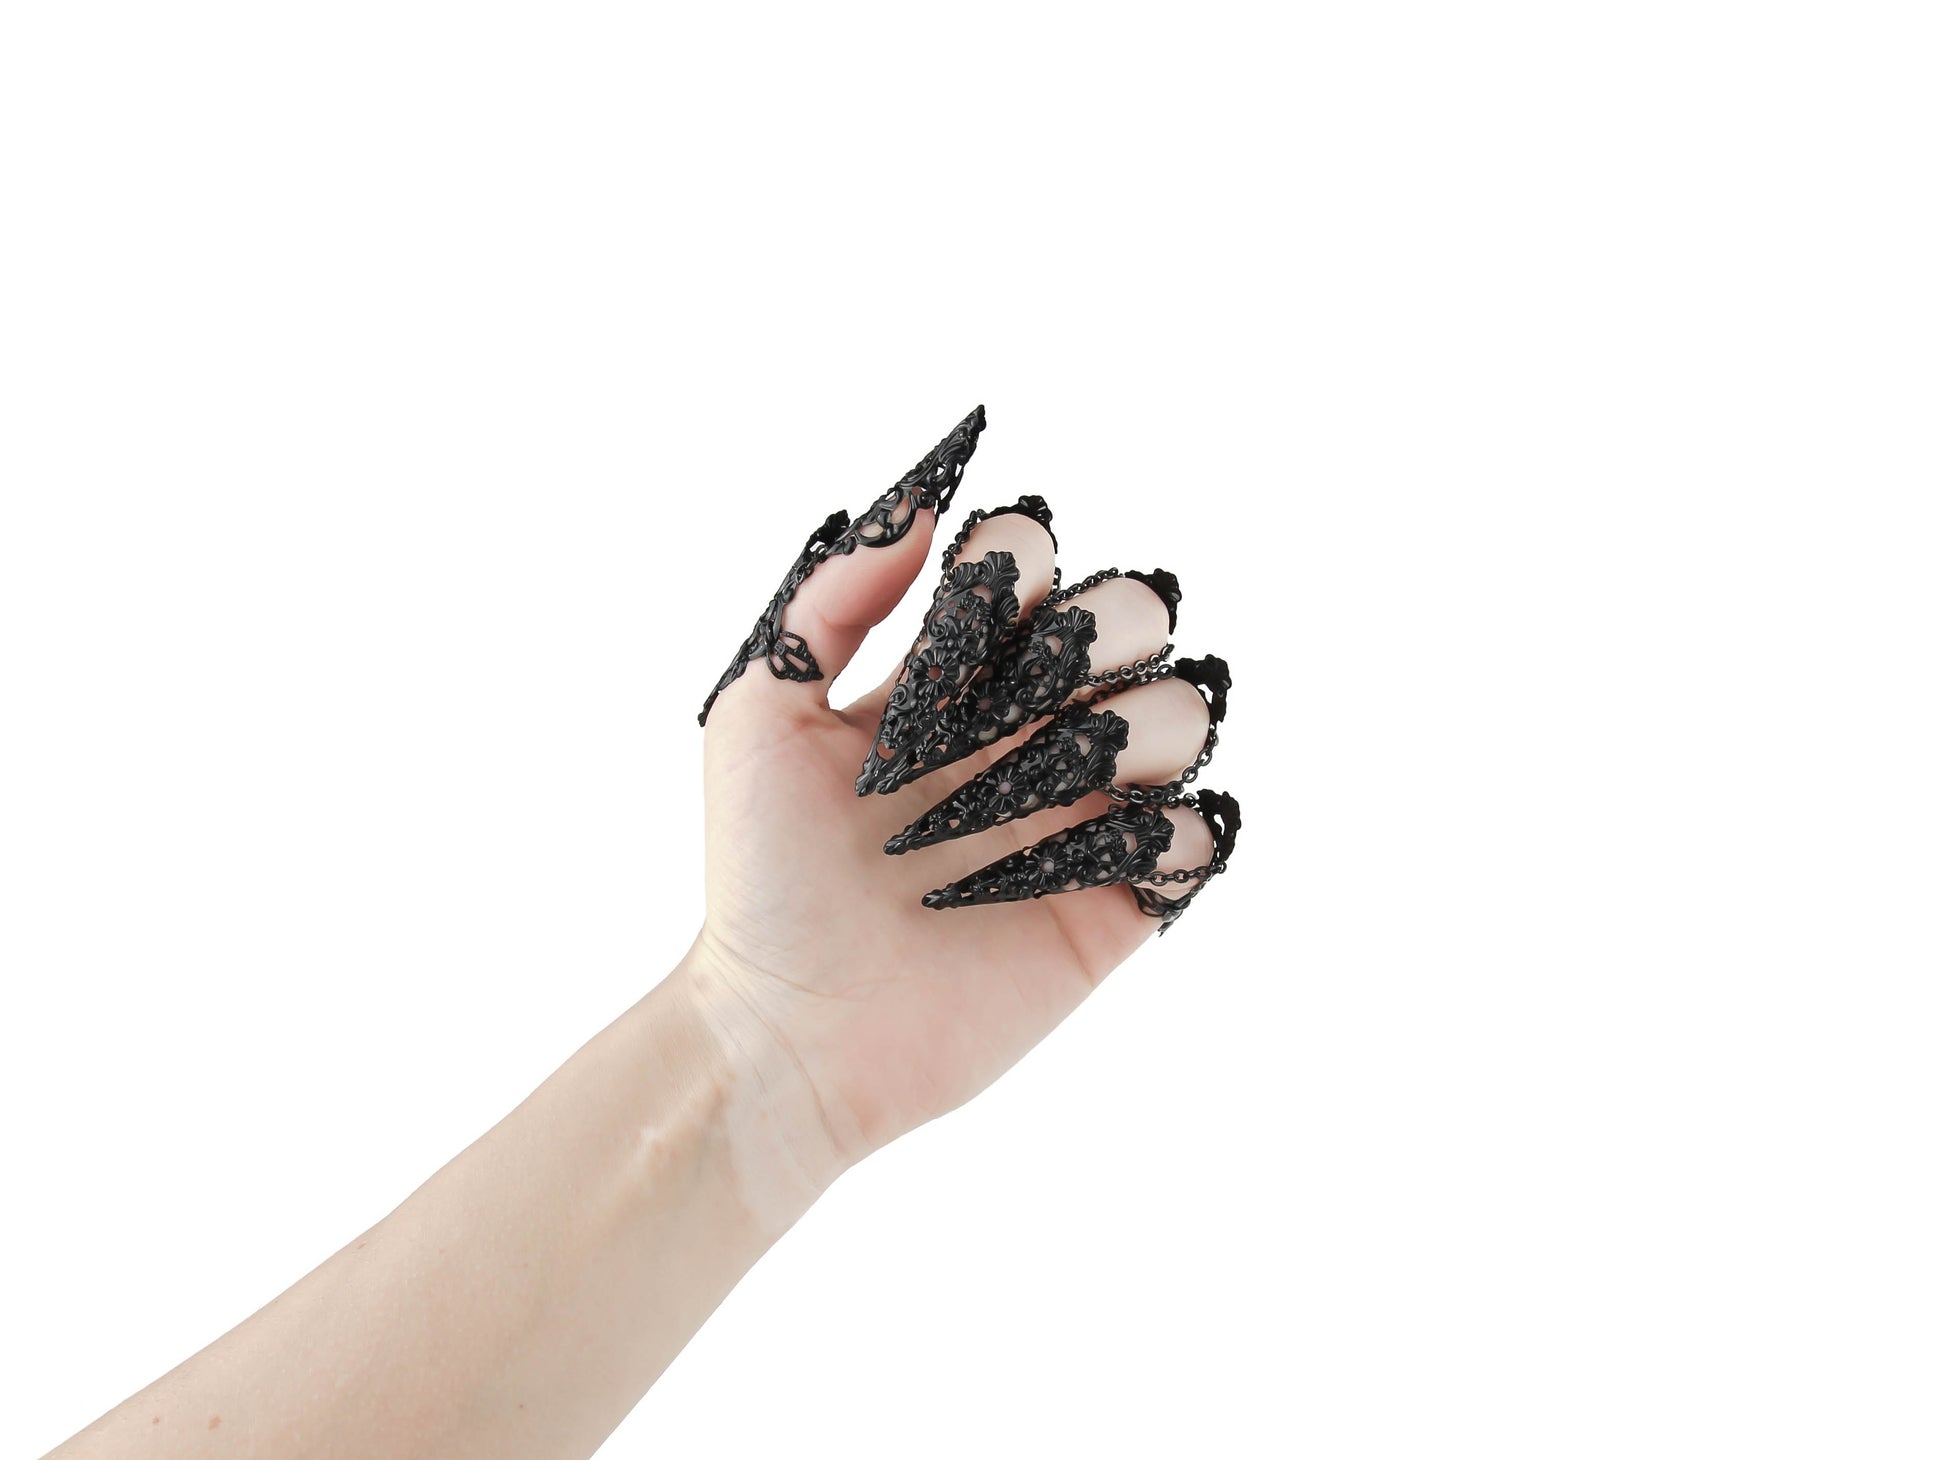 A hand is elegantly displayed, adorned with Myril Jewels' full set of ornate black rings with nail claws. These neo-goth pieces are the quintessence of gothic-chic, designed for those who favor dark, avant-garde jewelry, suitable for Halloween, festival wear, or as a striking everyday accessory